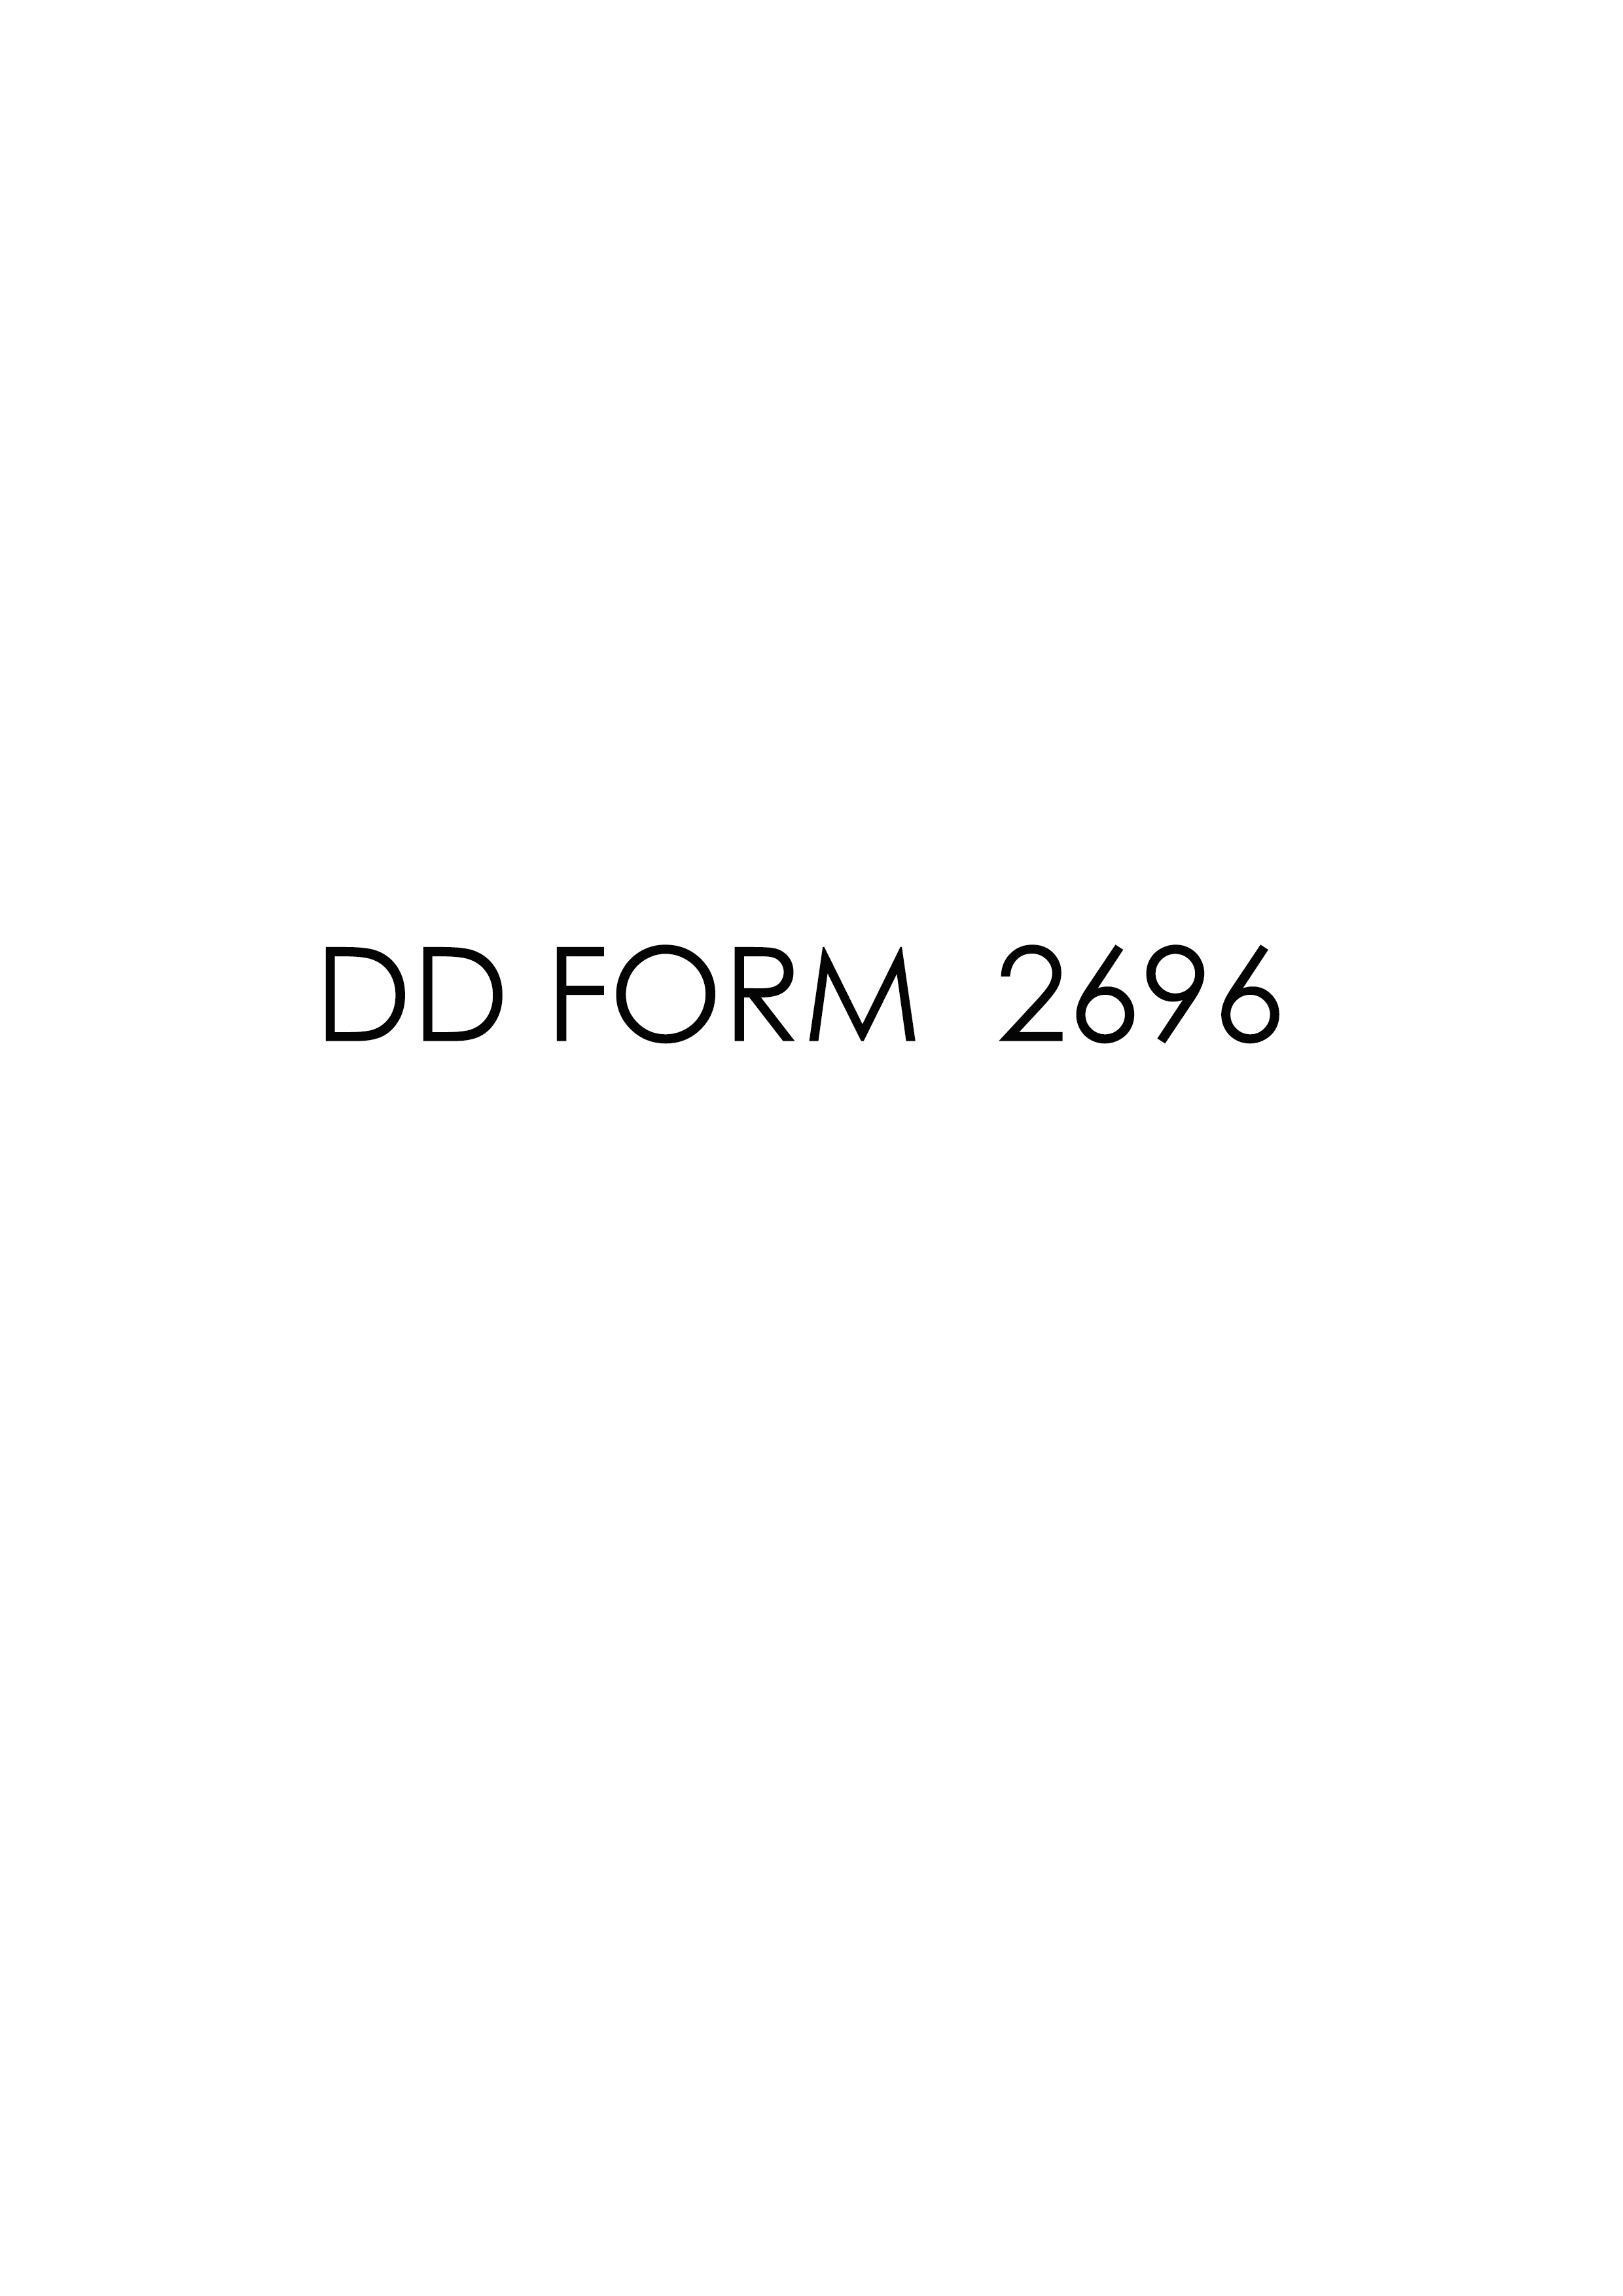 Download Fillable dd Form 2696